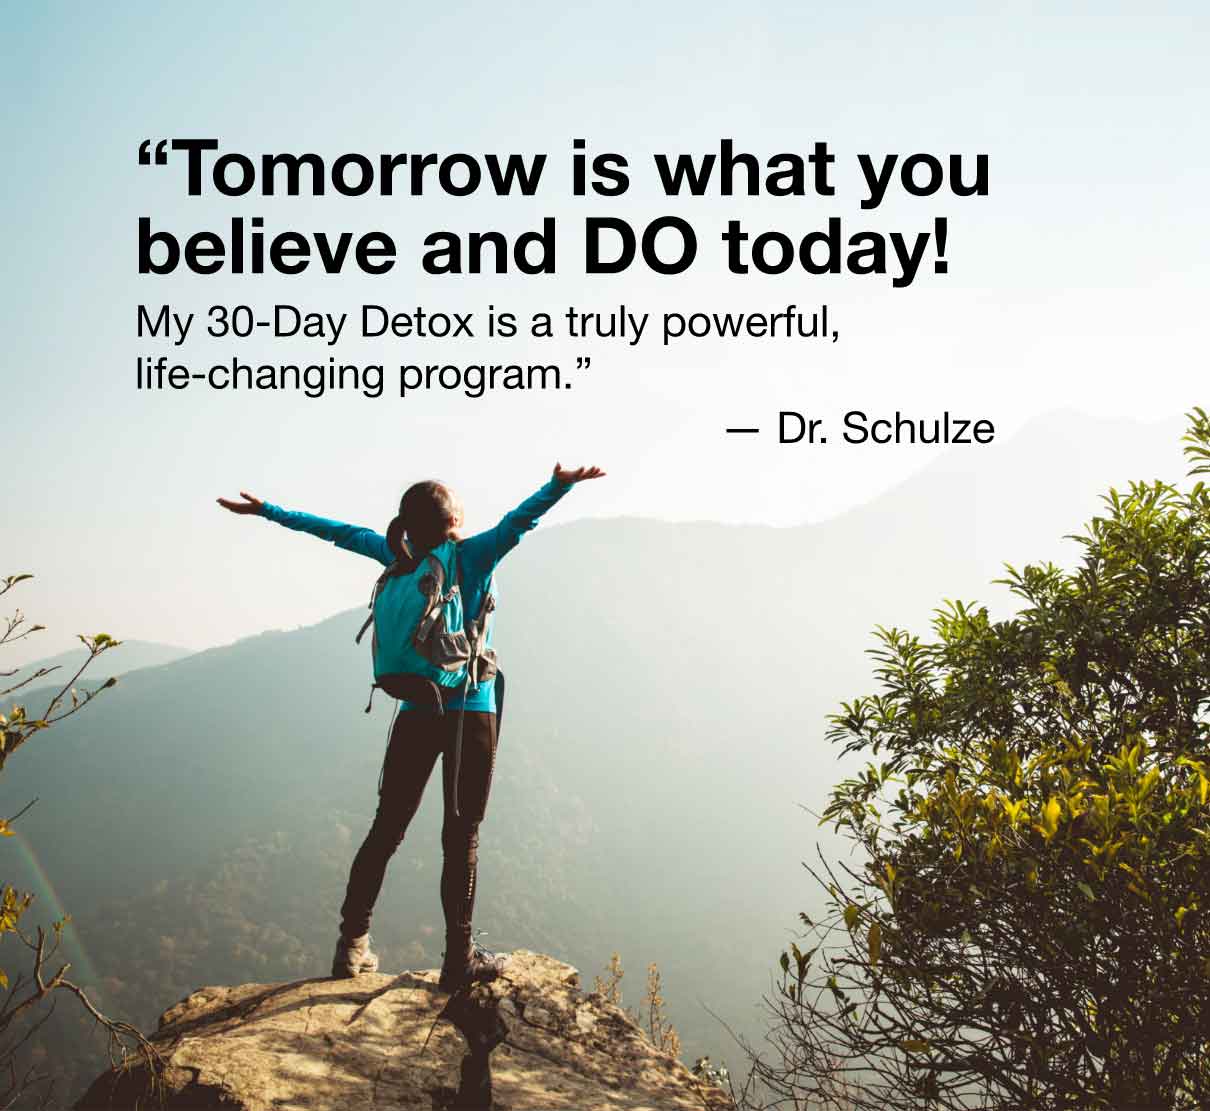 Tomorrow is what you believe and do today!